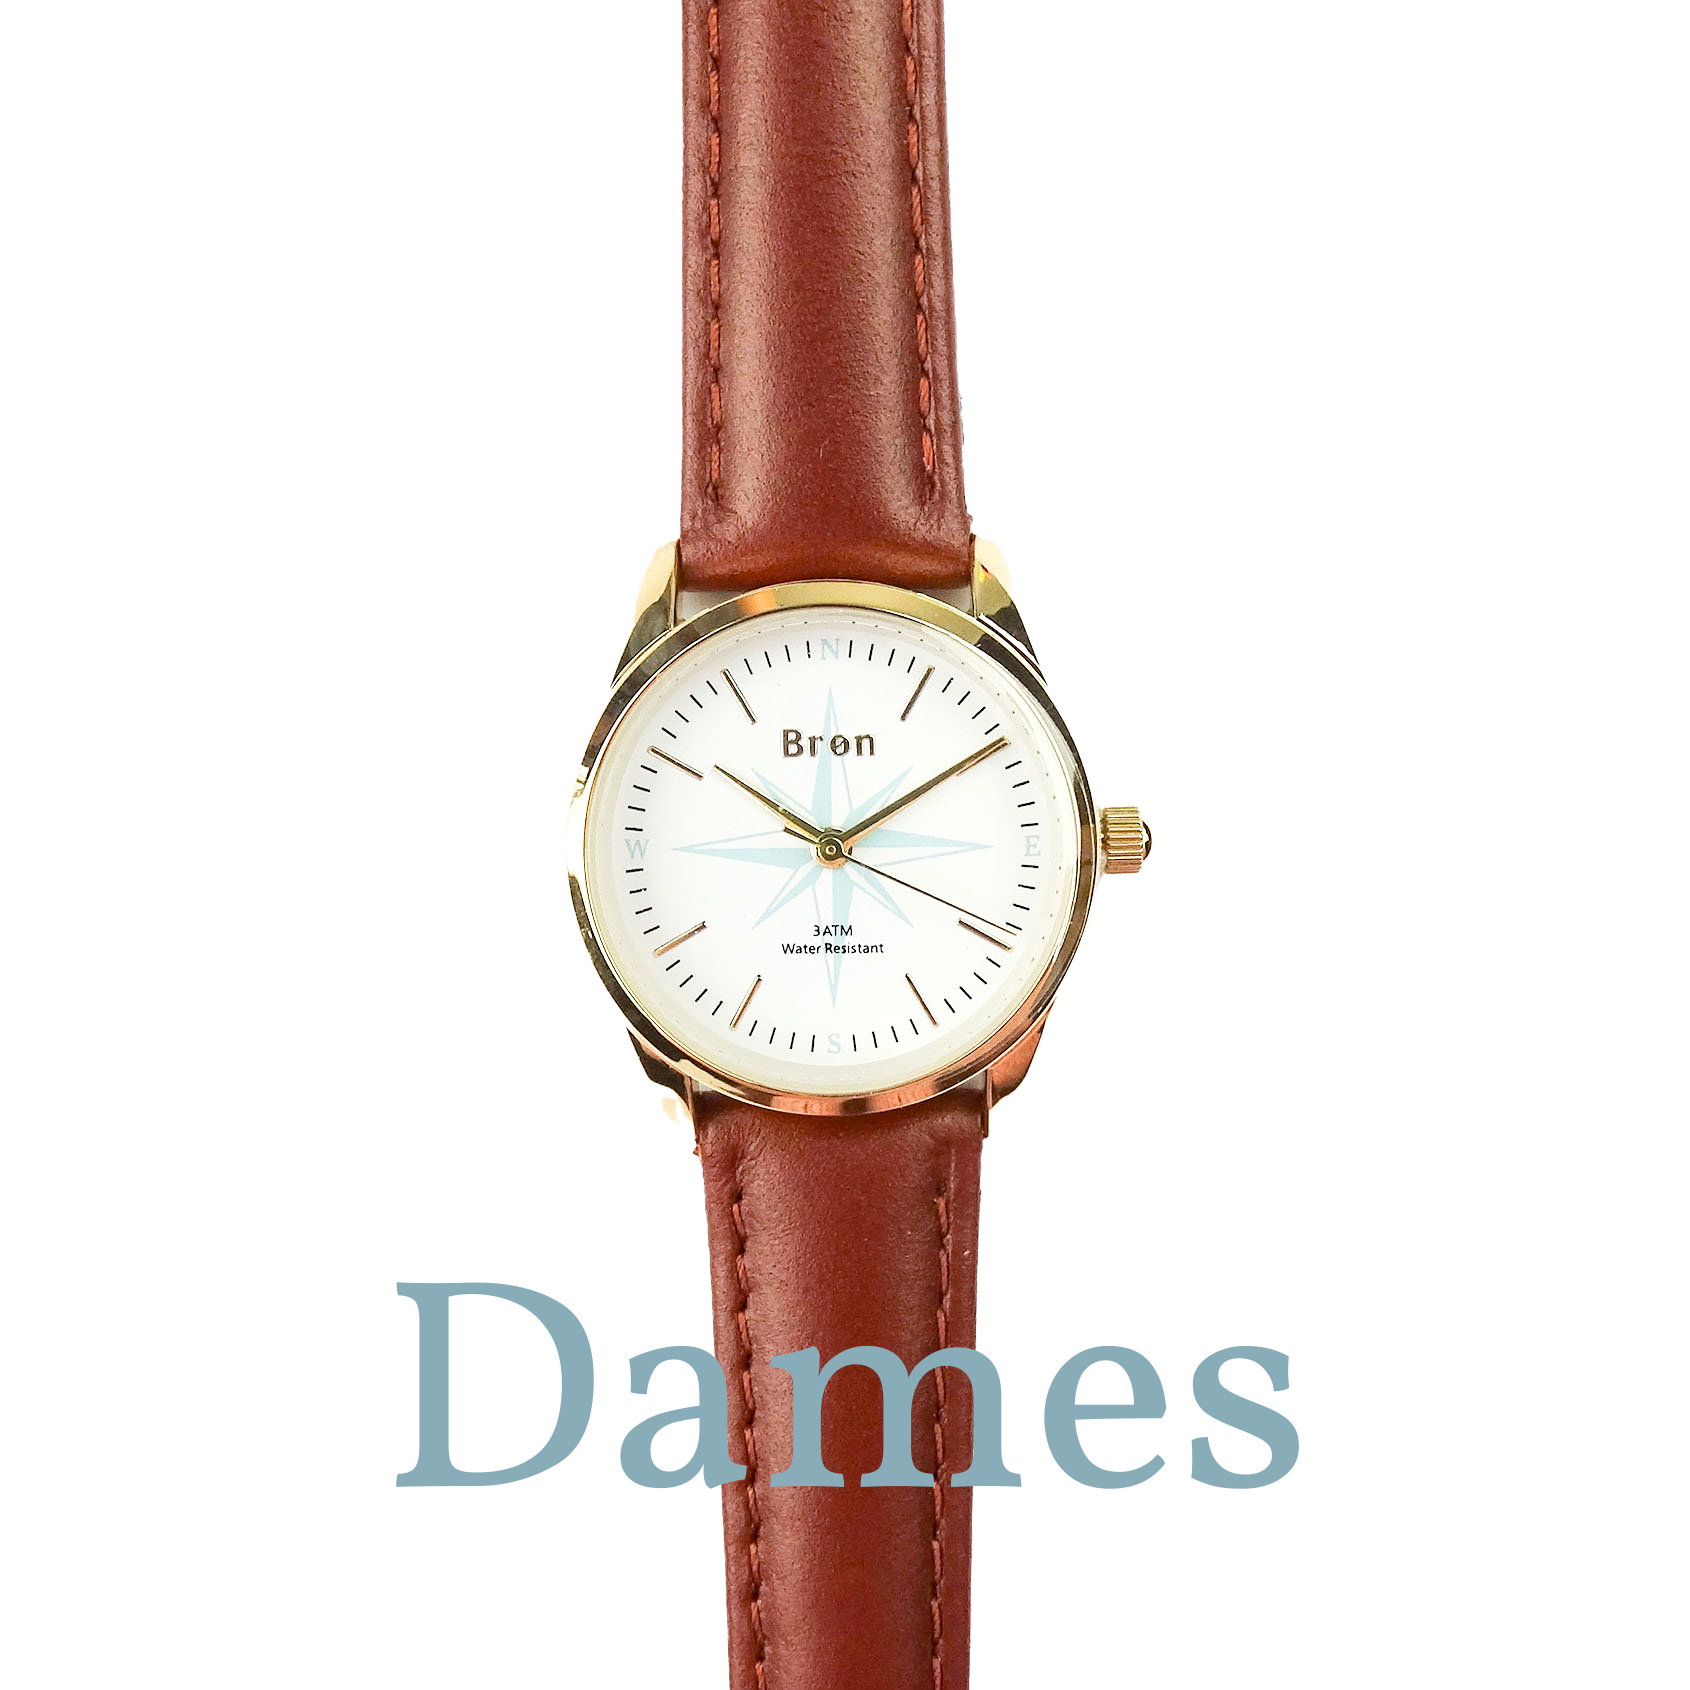 Ladies watch in gold with nautical compass